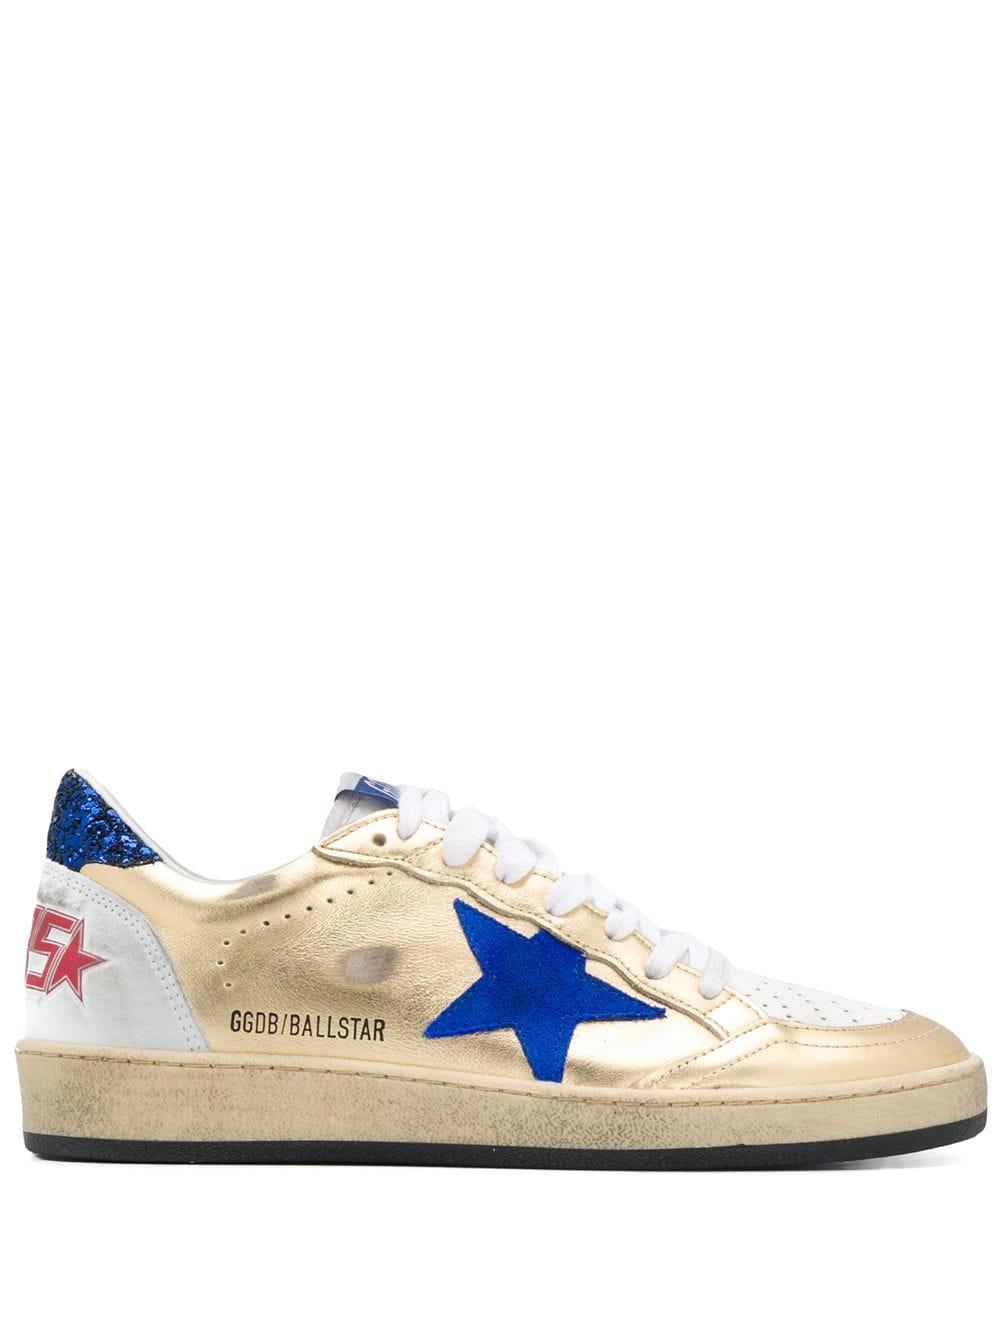 Golden Goose Deluxe Brand Leather Ball Star Low-top Sneakers in Gold ...